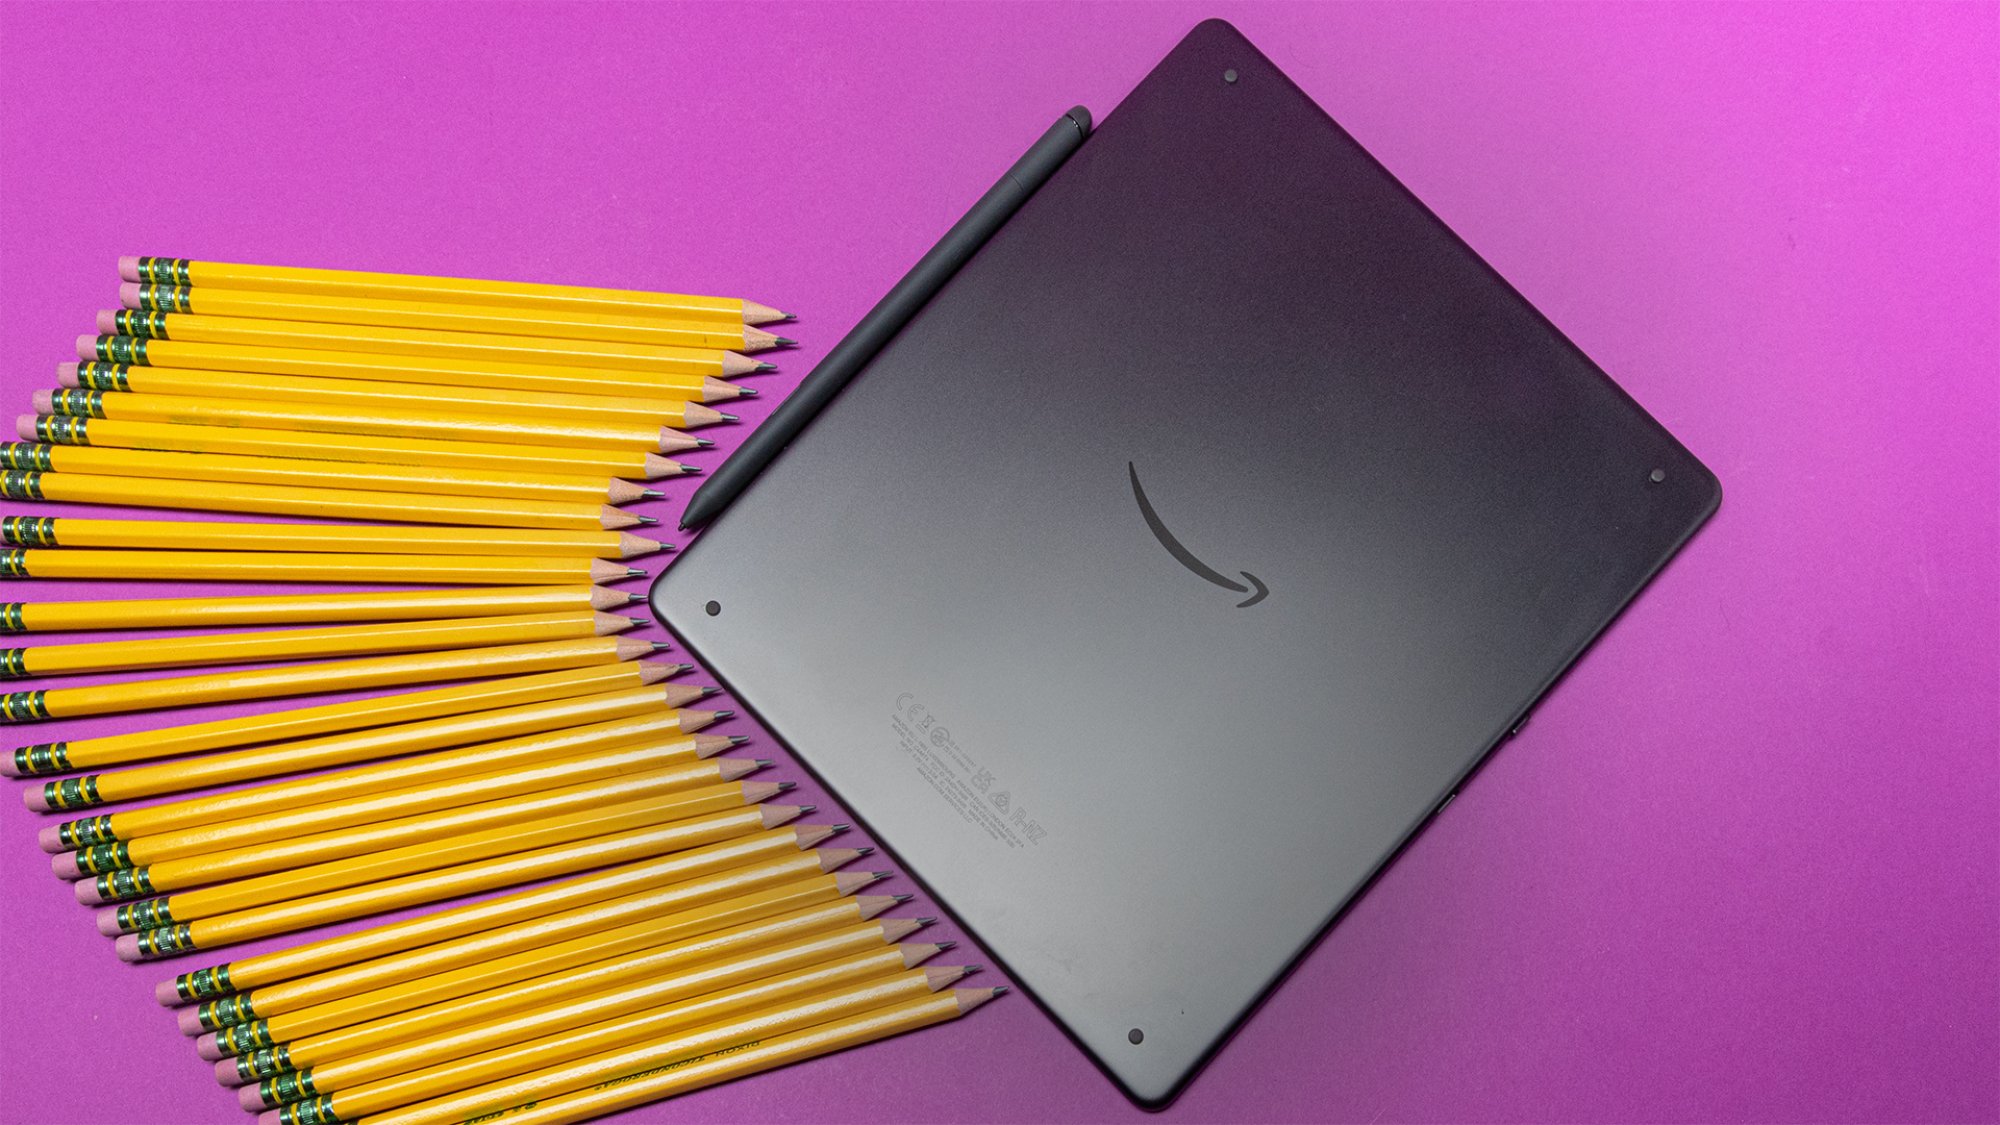 Kindle Scribe flanked by pencils